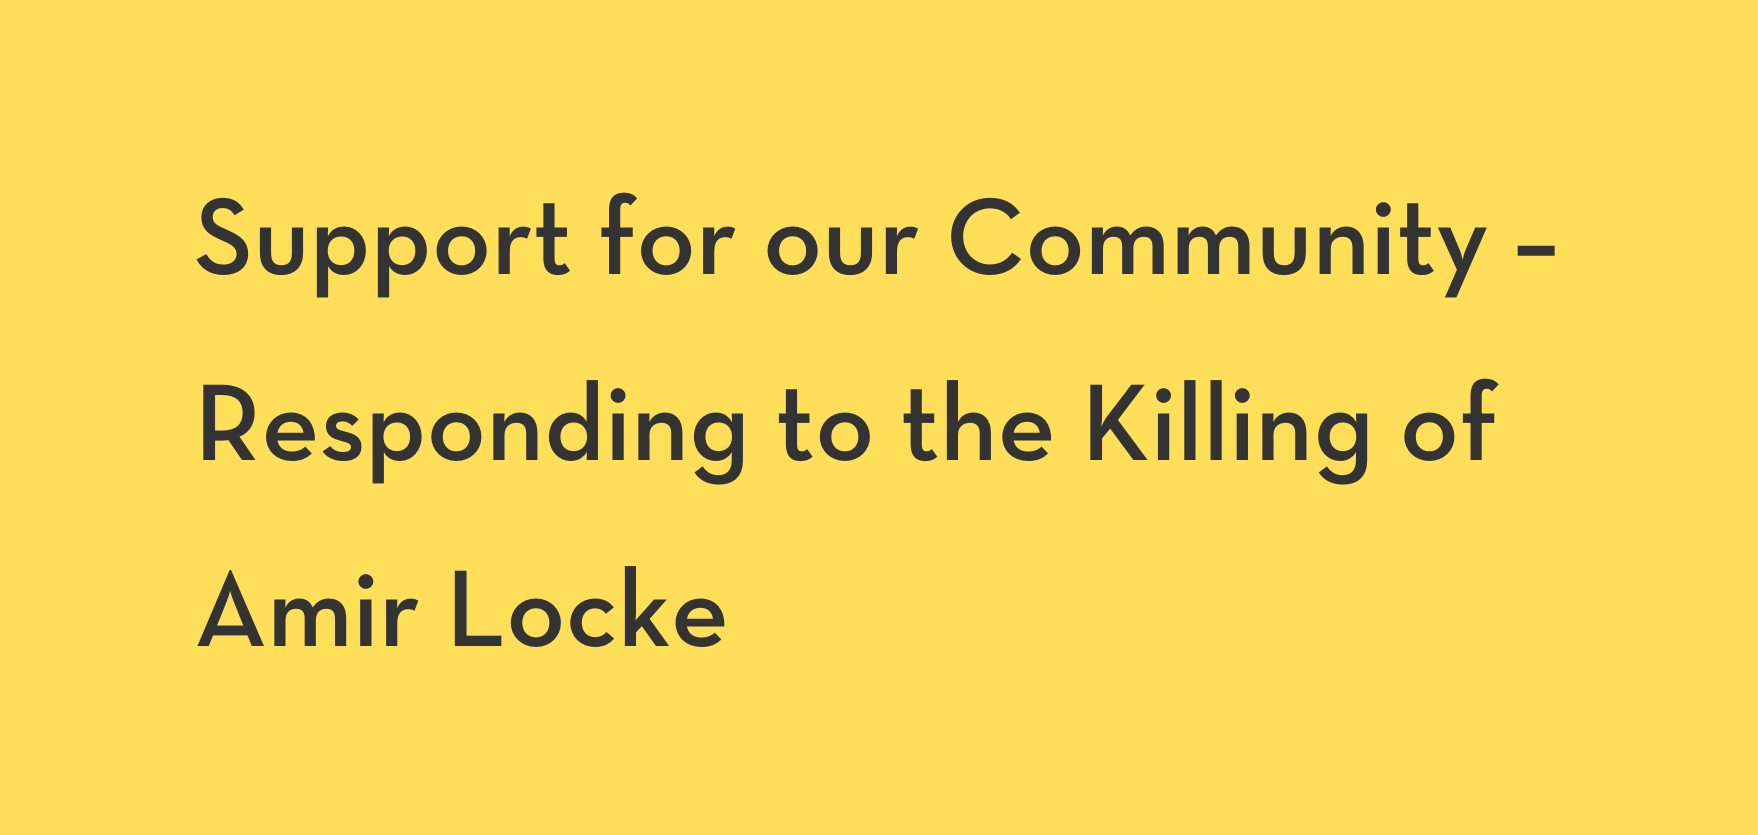 Support for our Community - Responding to the Killing of Amir Locke